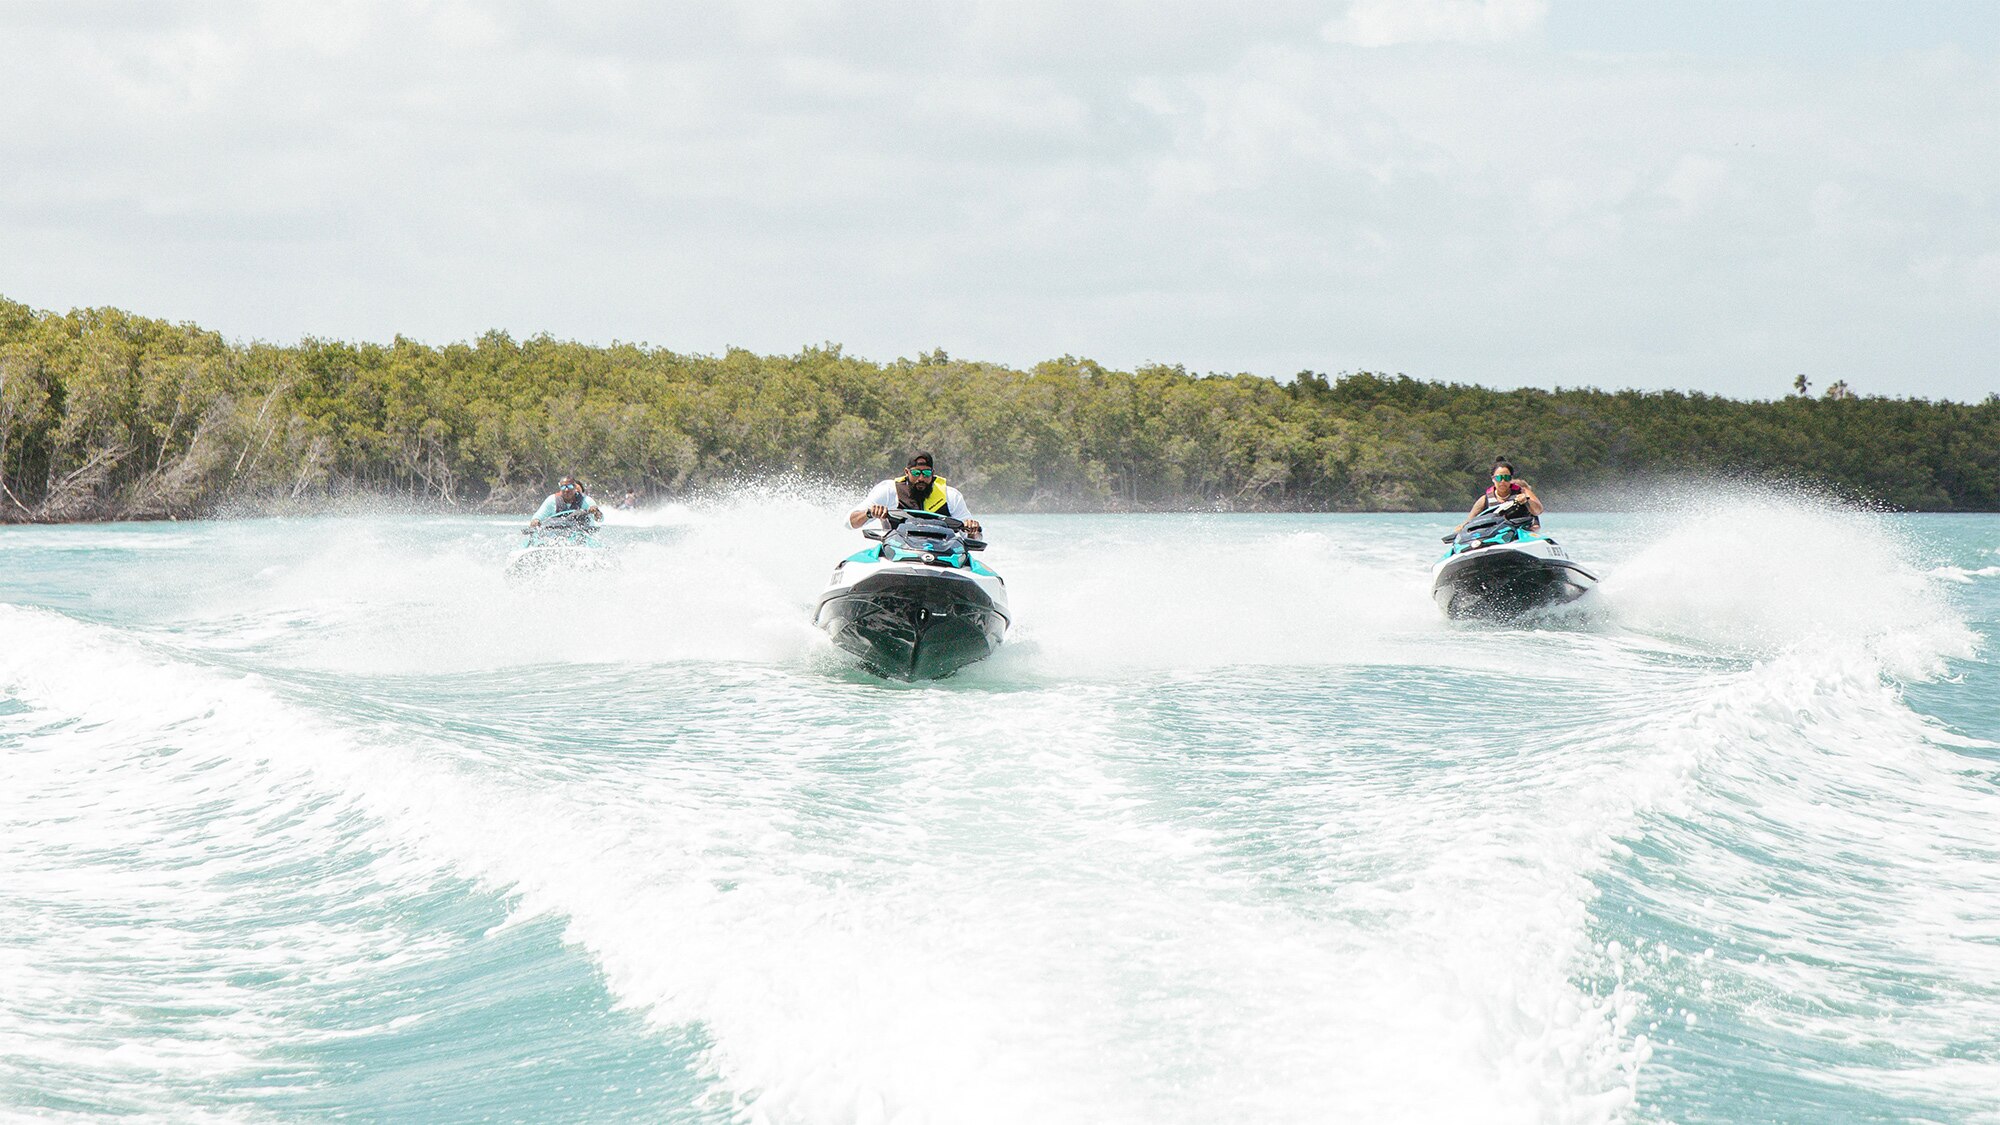 Three people each riding a personal watercraft on clear water